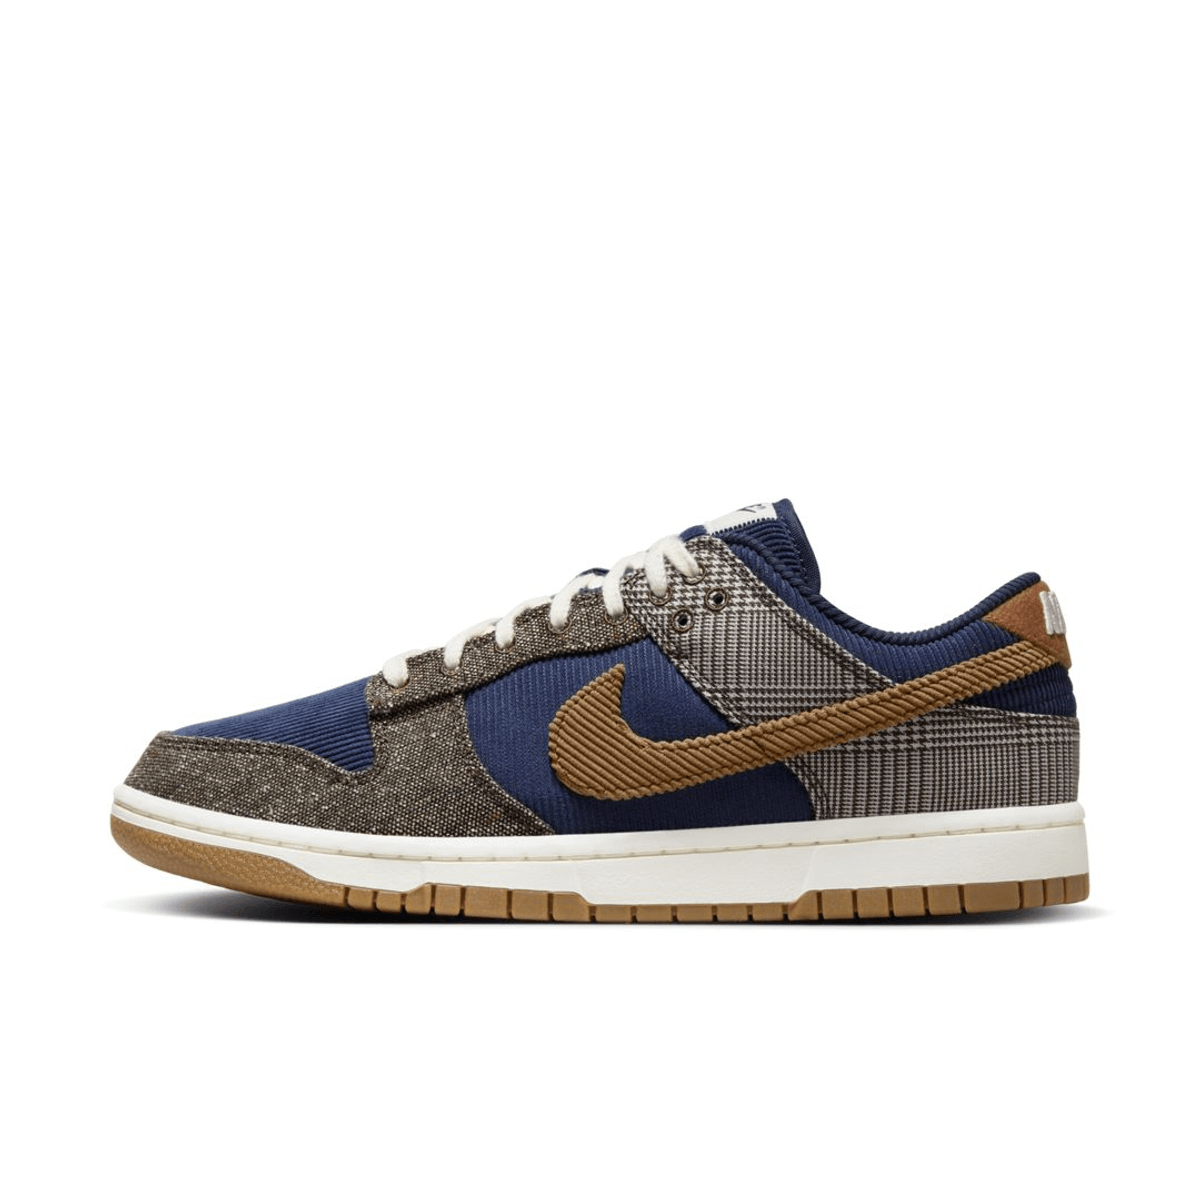 The Perfect Nike Dunk Low For Fall Arrives In Midnight Navy, Ale Brown, and Pale Ivory